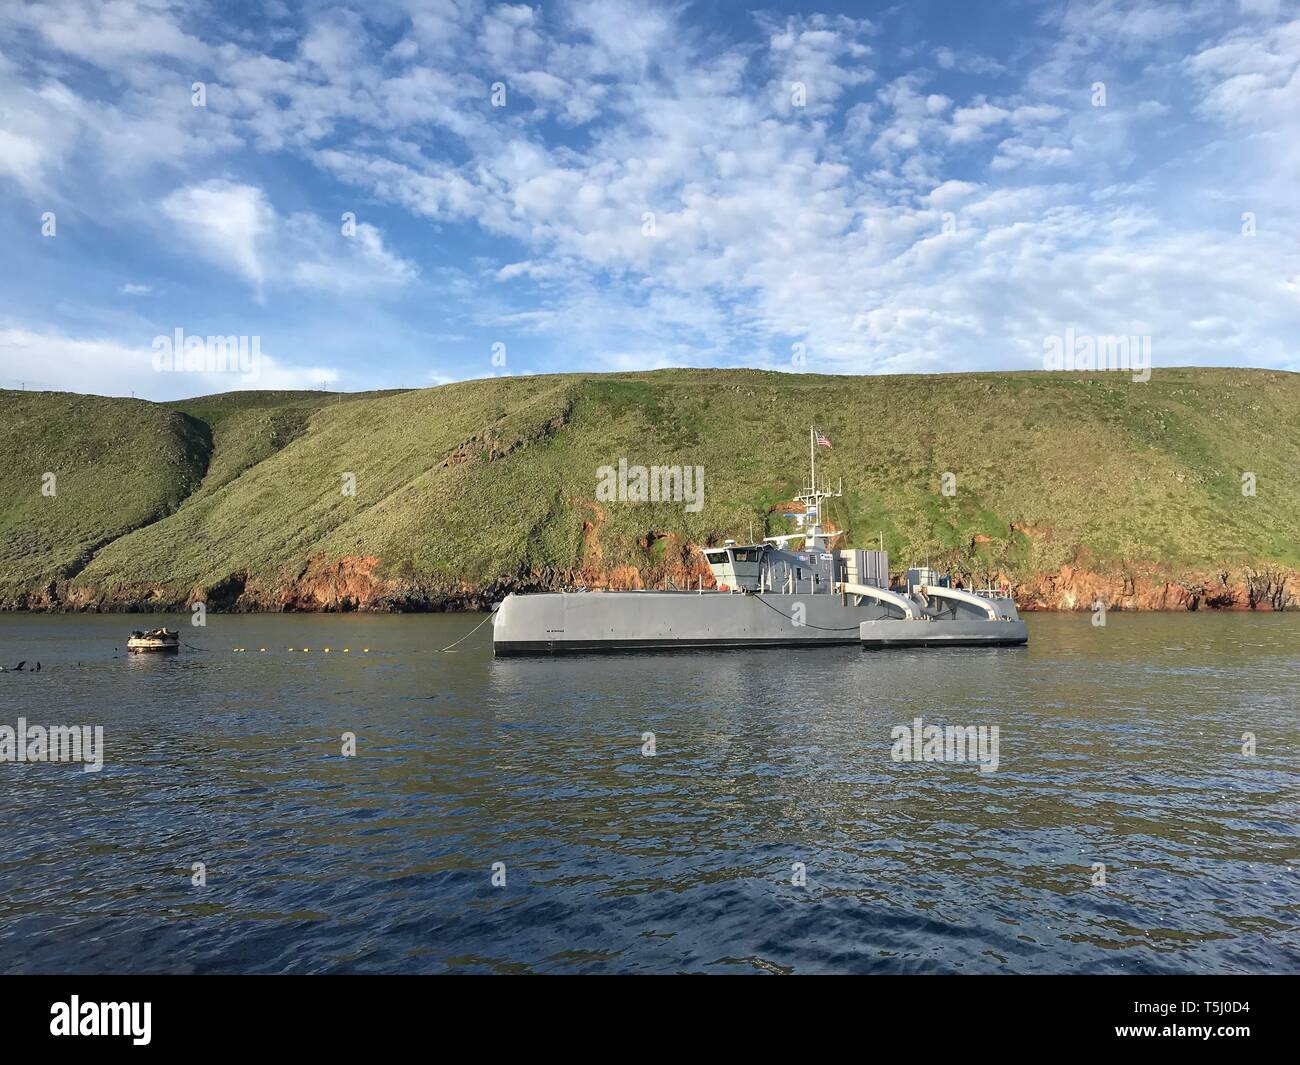 181031-N-YG220-003 (Feb. 1, 2019) Sea Hunter, an entirely new class of unmanned sea surface vehicle developed in partnership between the Office of Naval Research (ONR) and the Defense Advanced Research Projects Agency (DARPA), recently completed an autonomous sail from San Diego to Hawaii and back—the first ship ever to do so autonomously. Sea Hunter is part of ONR’s Medium Displacement Unmanned Surface Vehicle (MDUSV) project. (U.S. Navy photo) Stock Photo